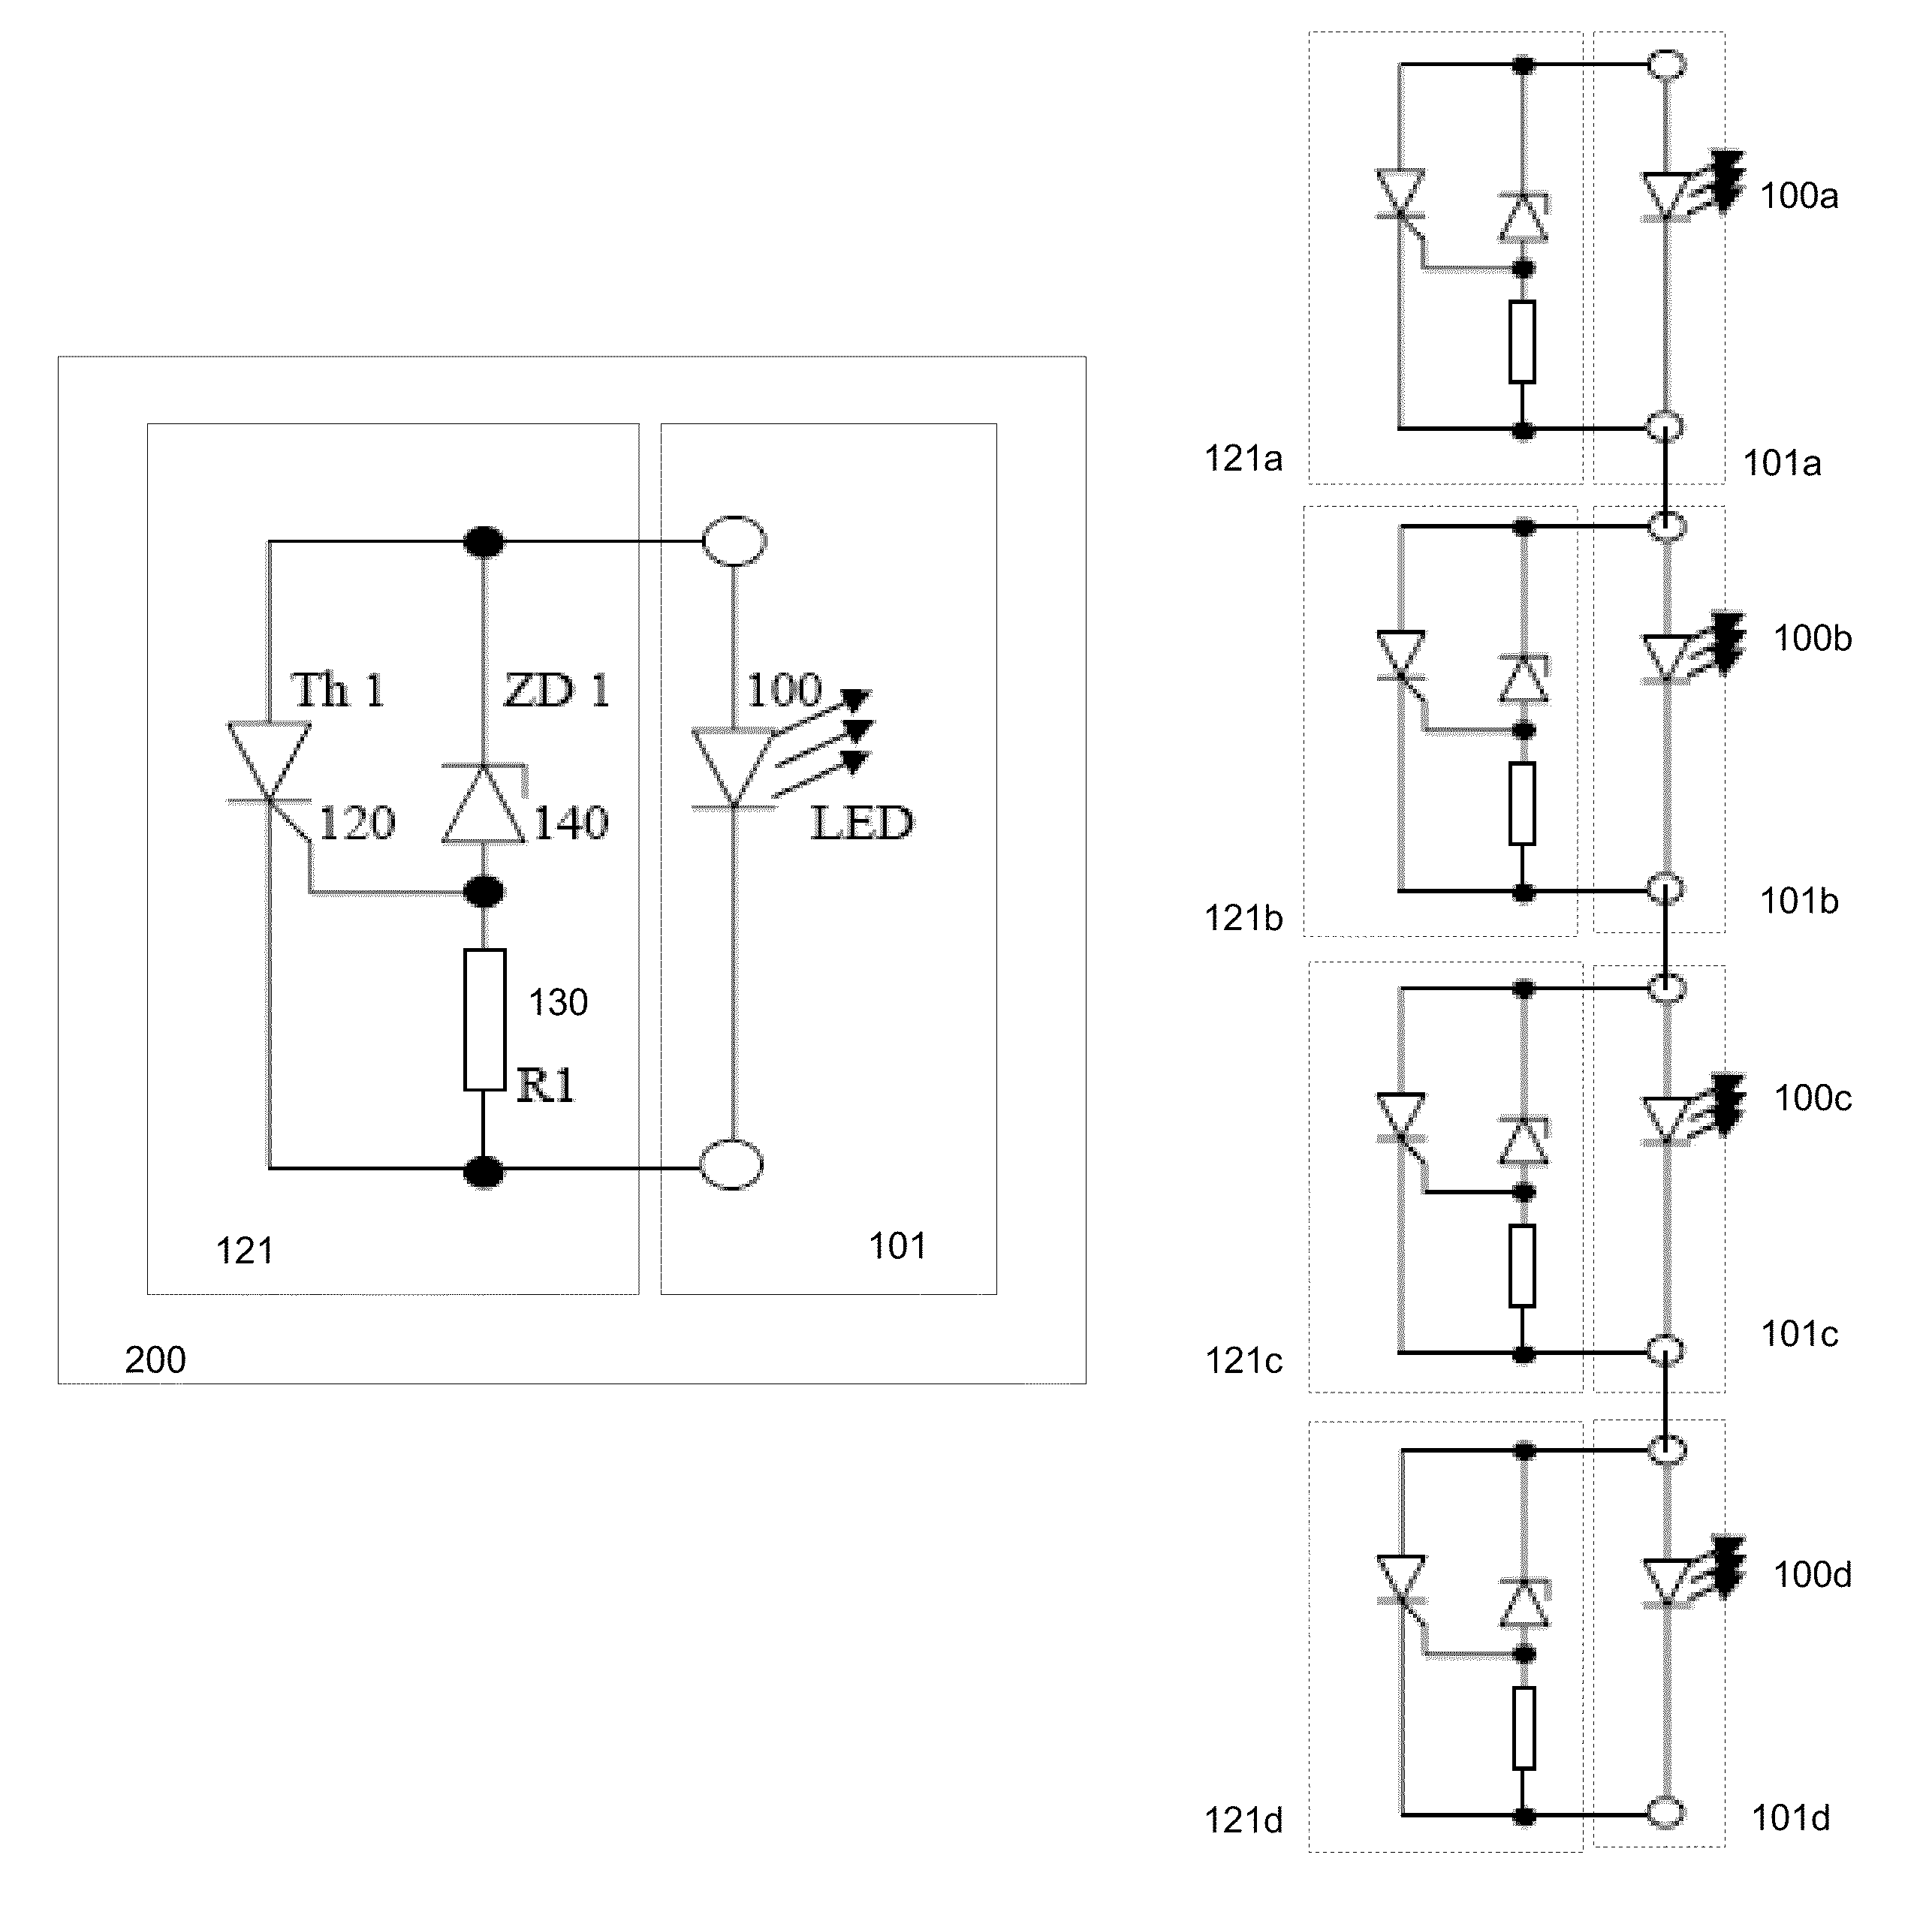 LED lighting system with bypass circuit for failed LED